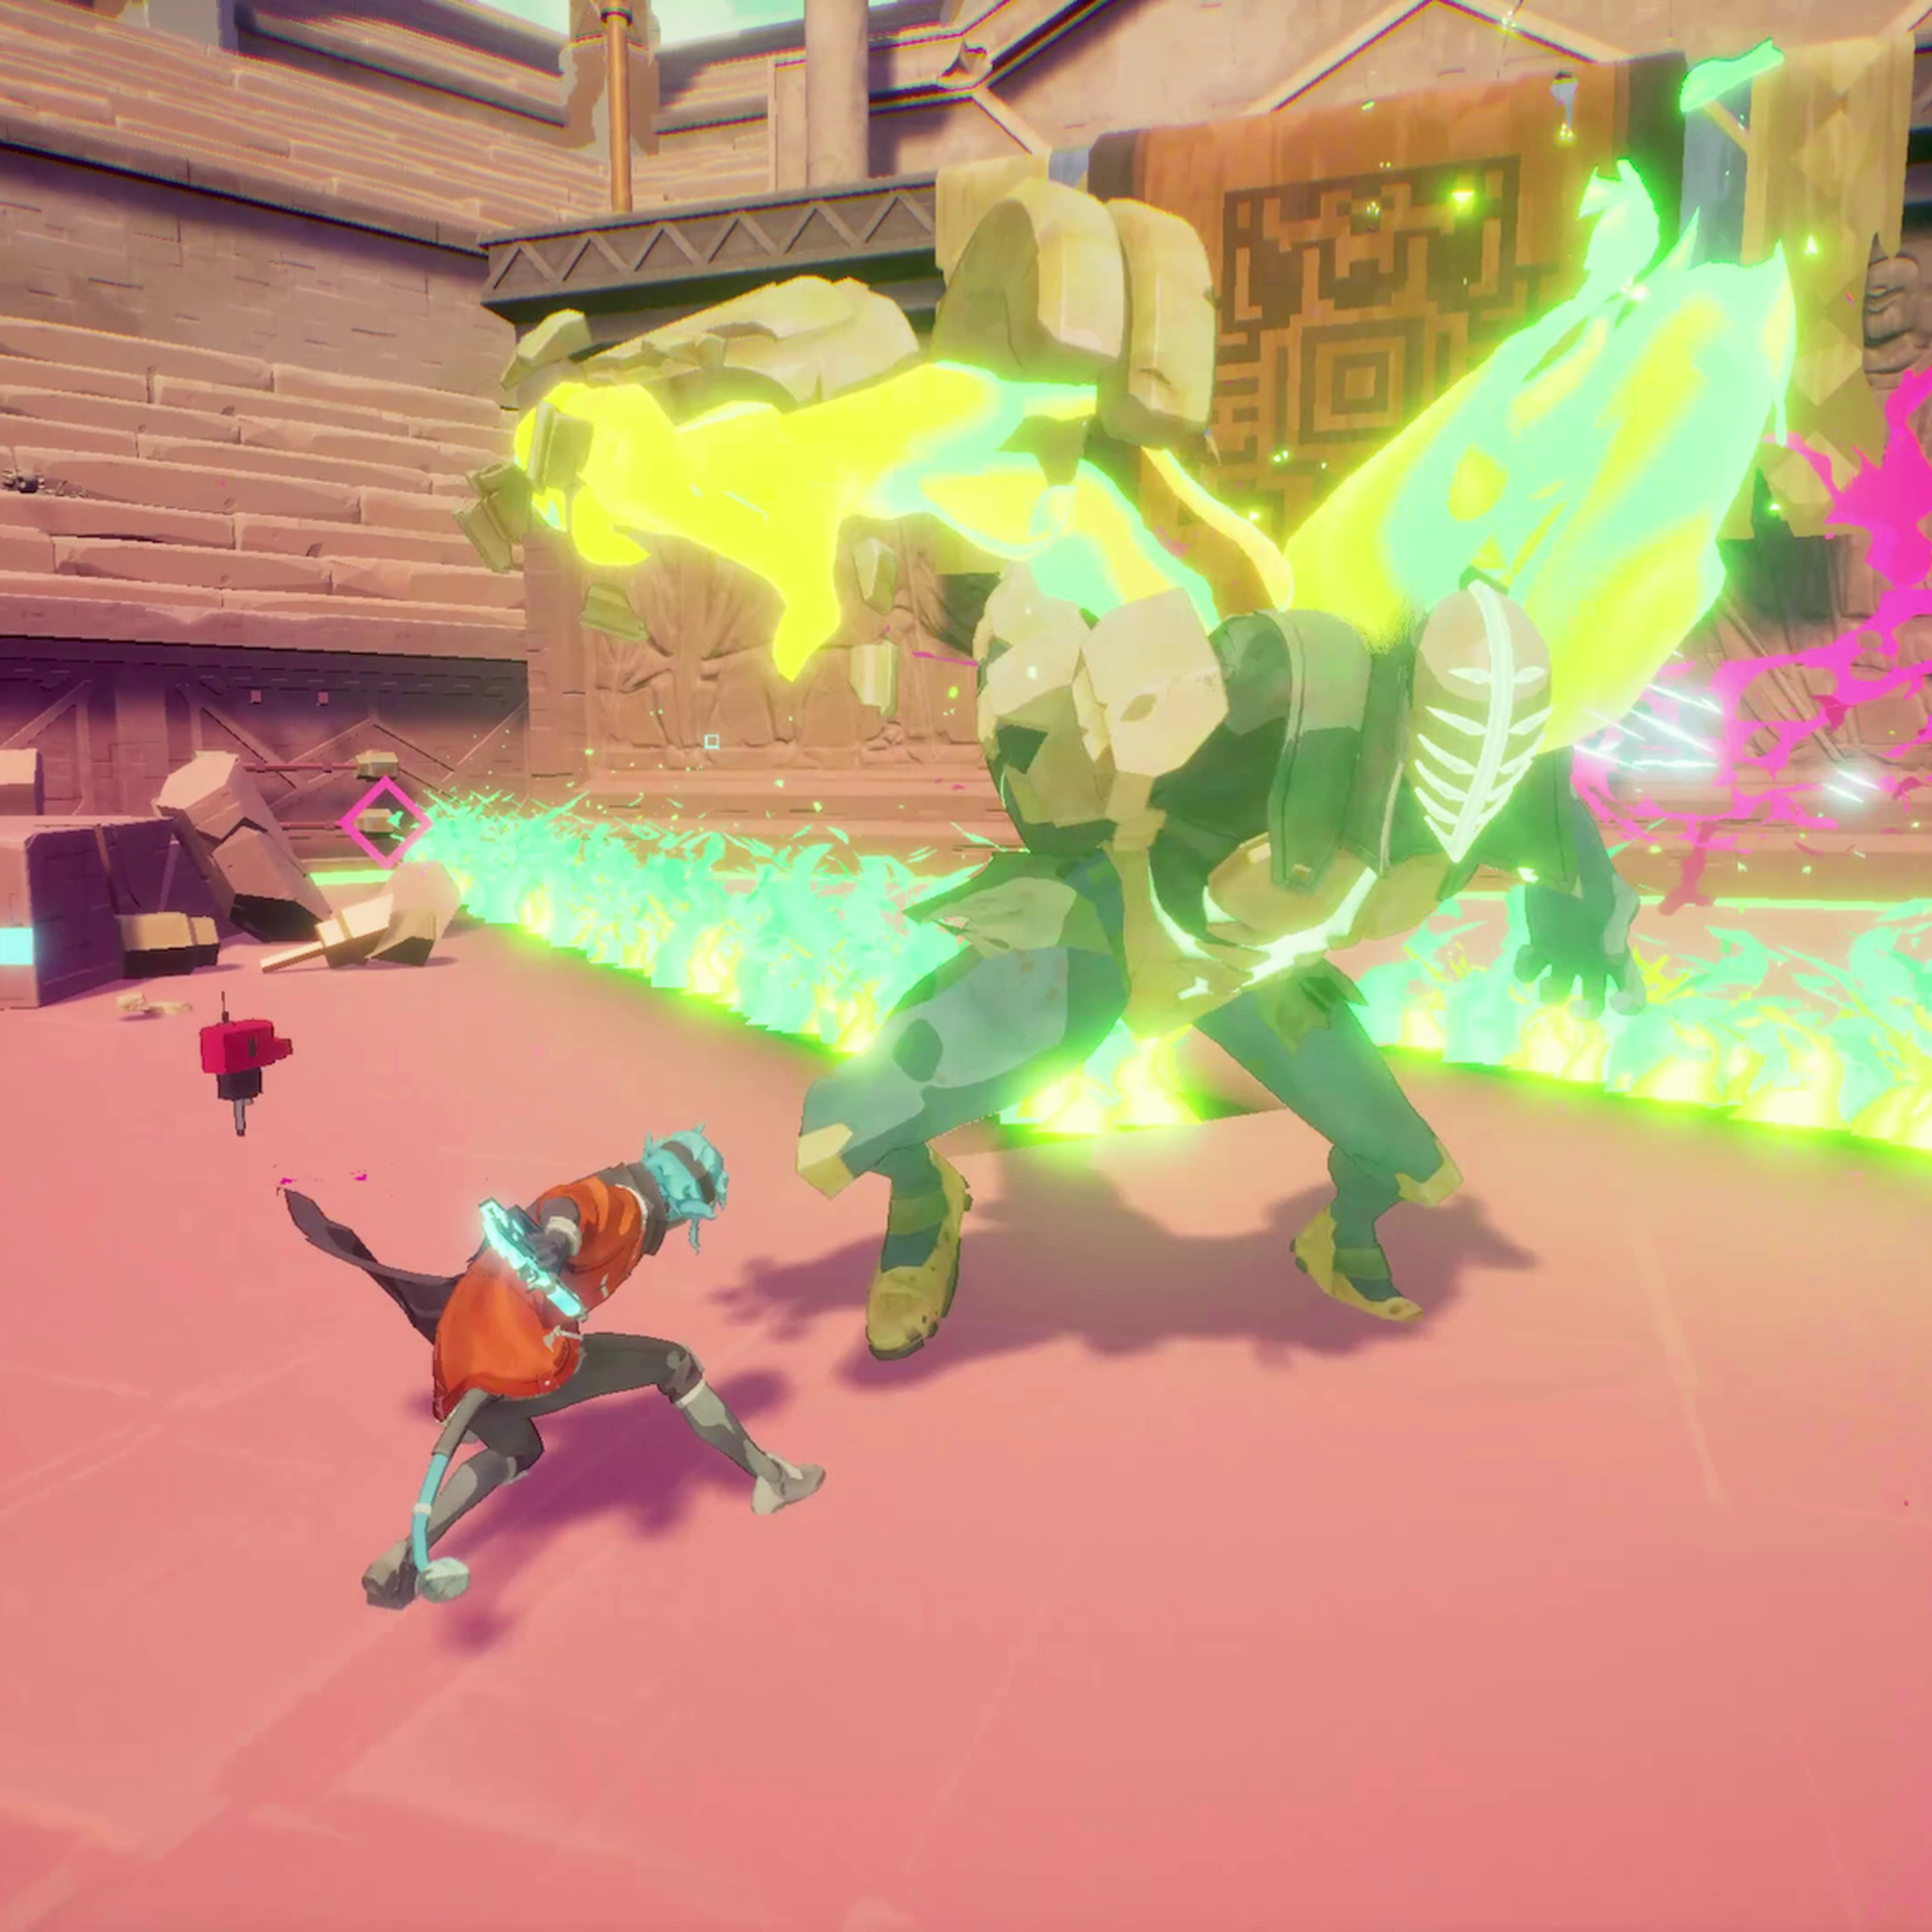 A screenshot from Hyper Light Breaker. The player character in orange is fighting Exus, a boss in the game.